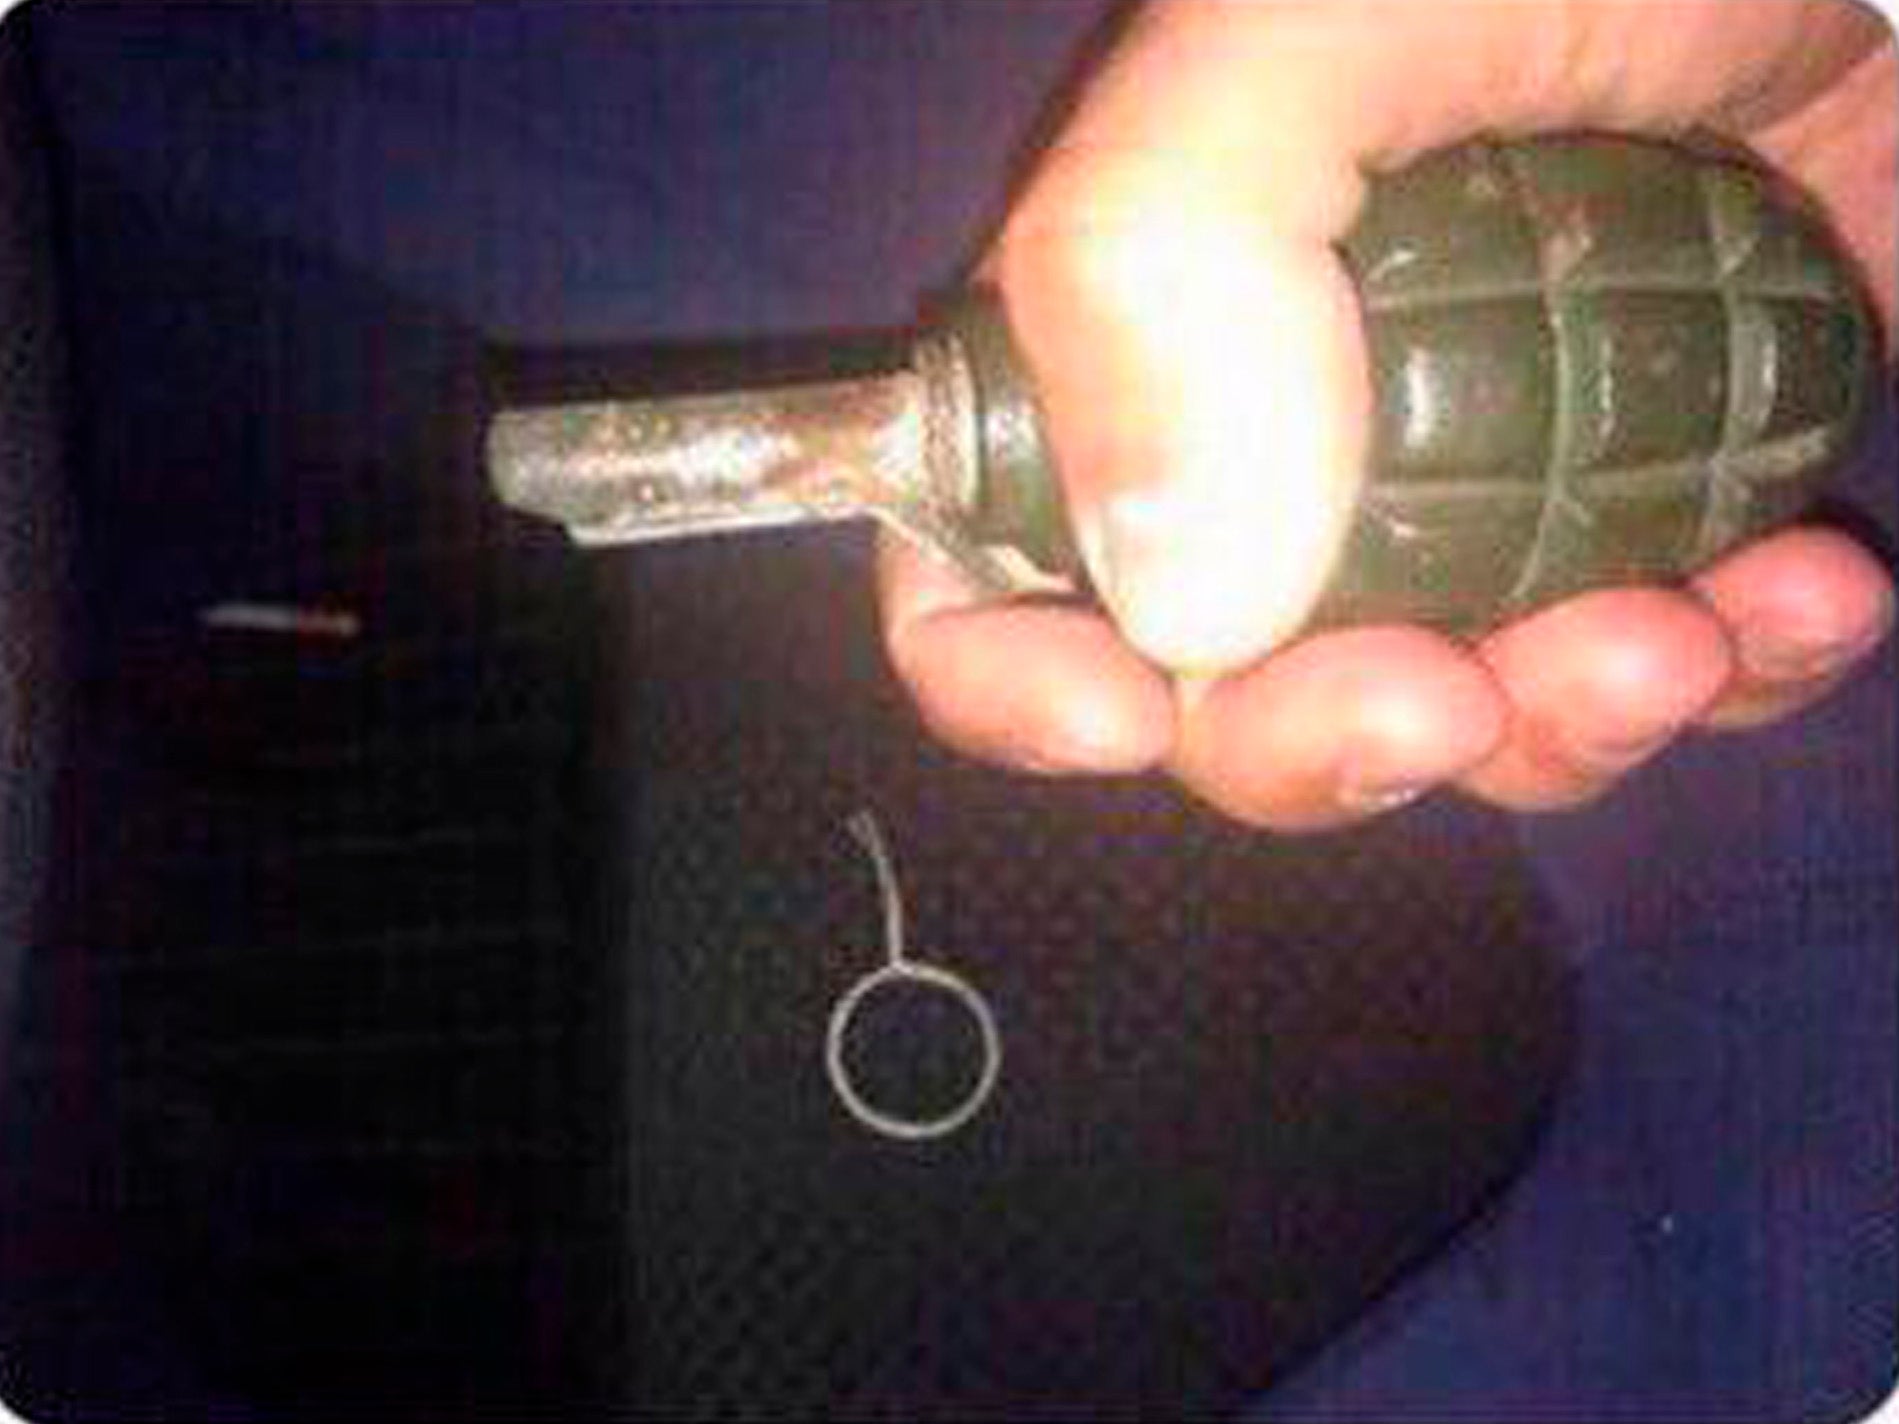 Alexander Chechik died soon after he posted a photograph of a hand grenade from which he had removed the pin